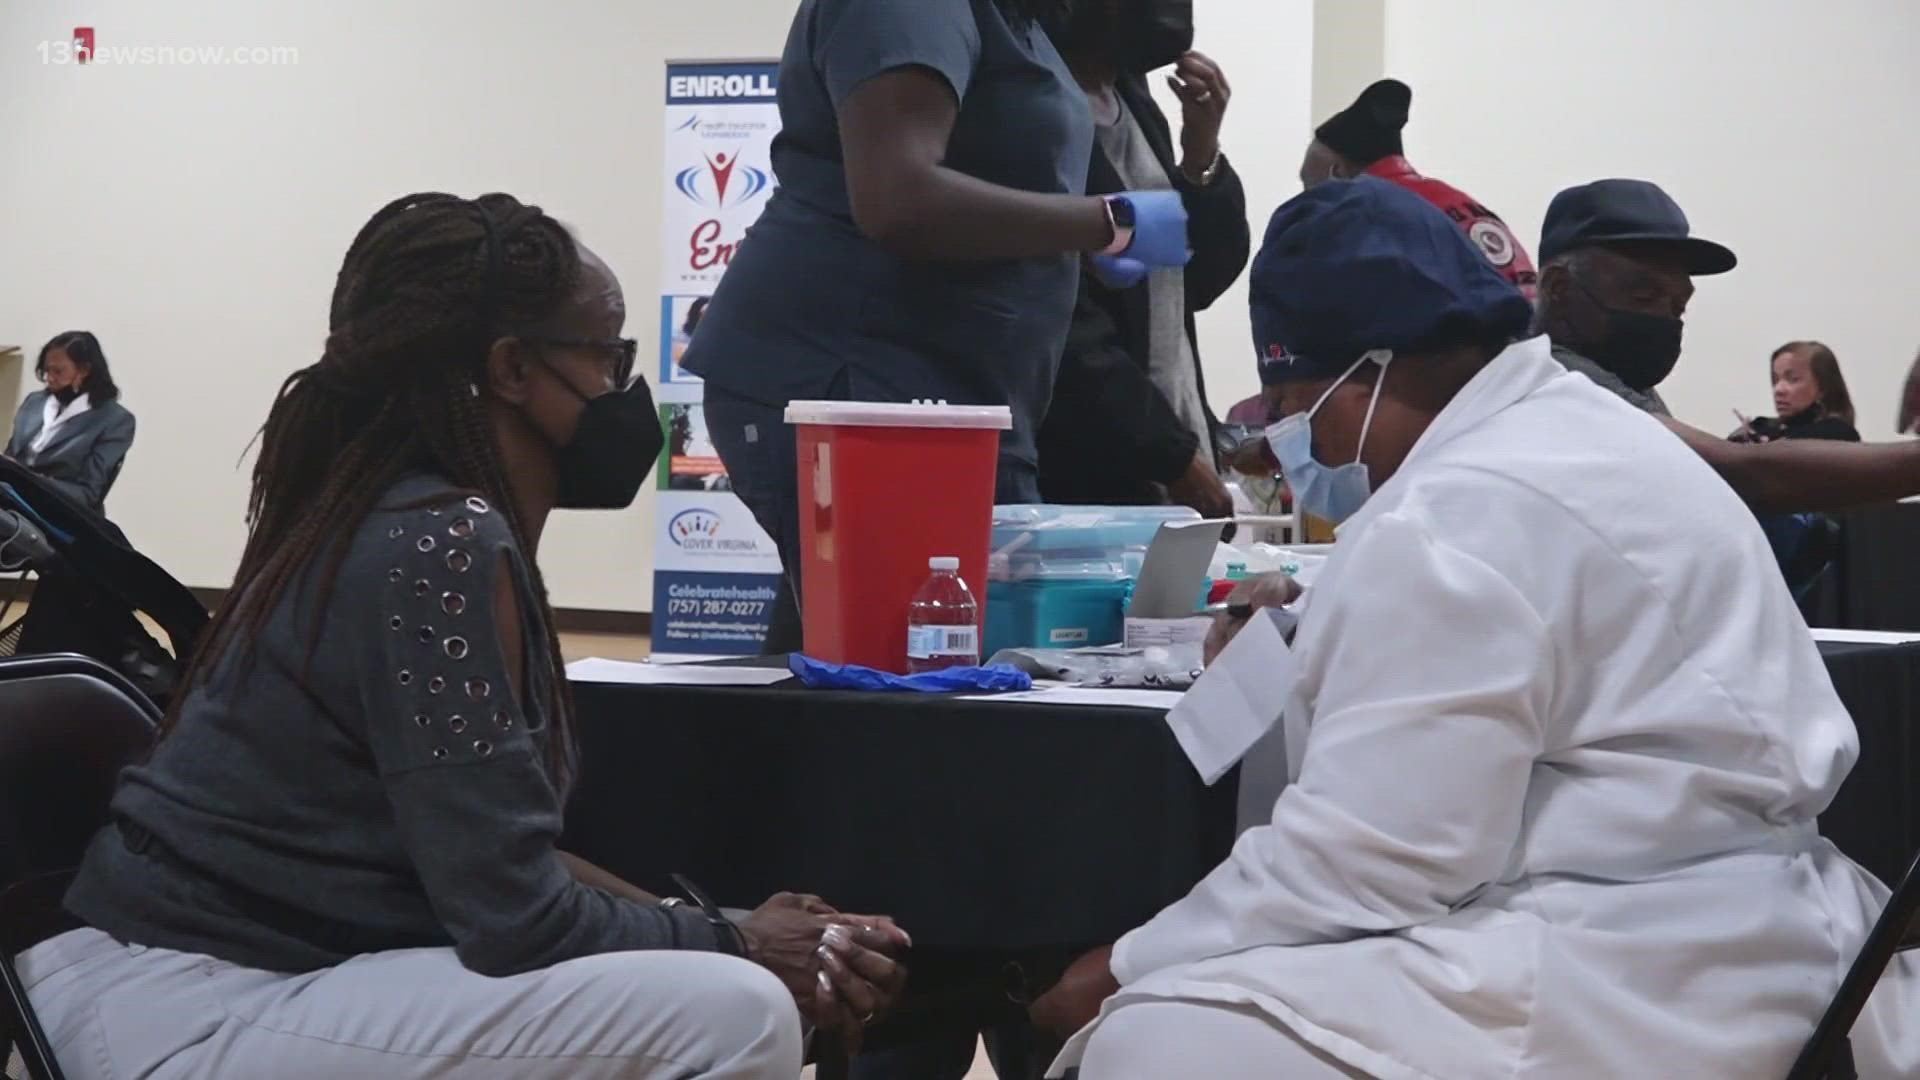 Celebrate Healthcare has coordinated events across Hampton Roads. If you get your shots at one of the participating museums, your group can go in for free.